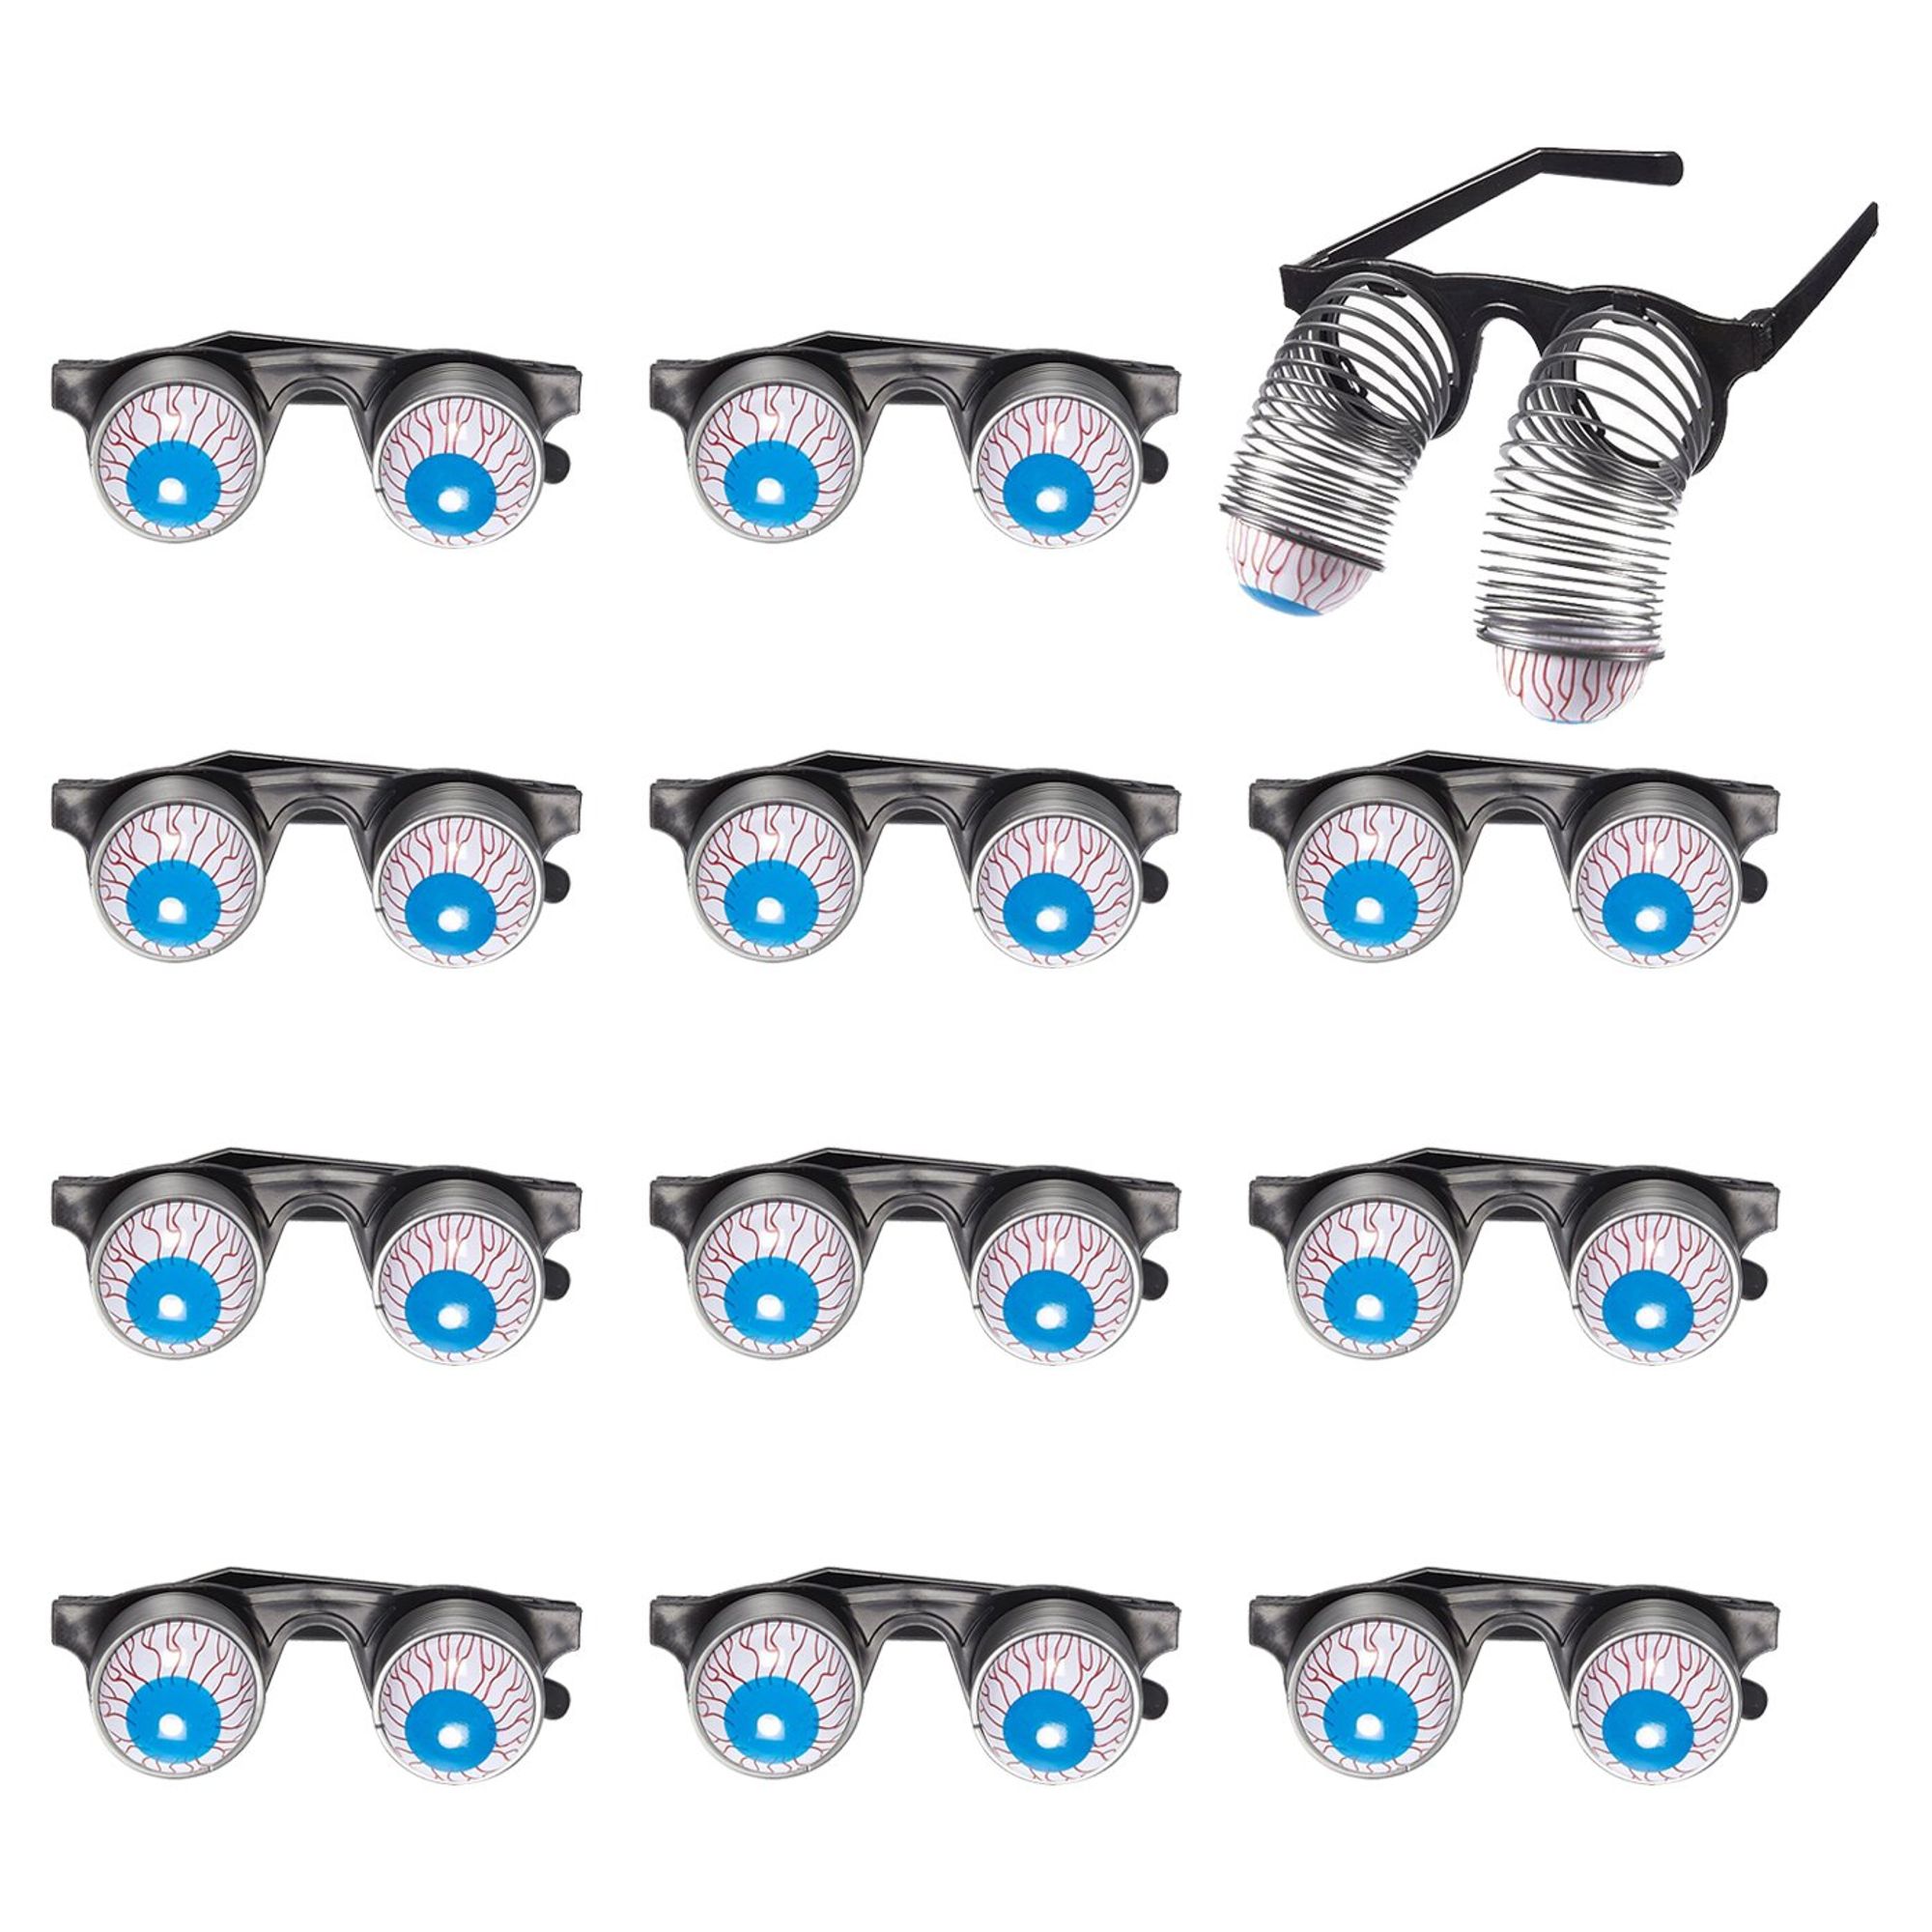 Halloween gag gifts for young children #1: Blue panda 12 Count slinky glasses